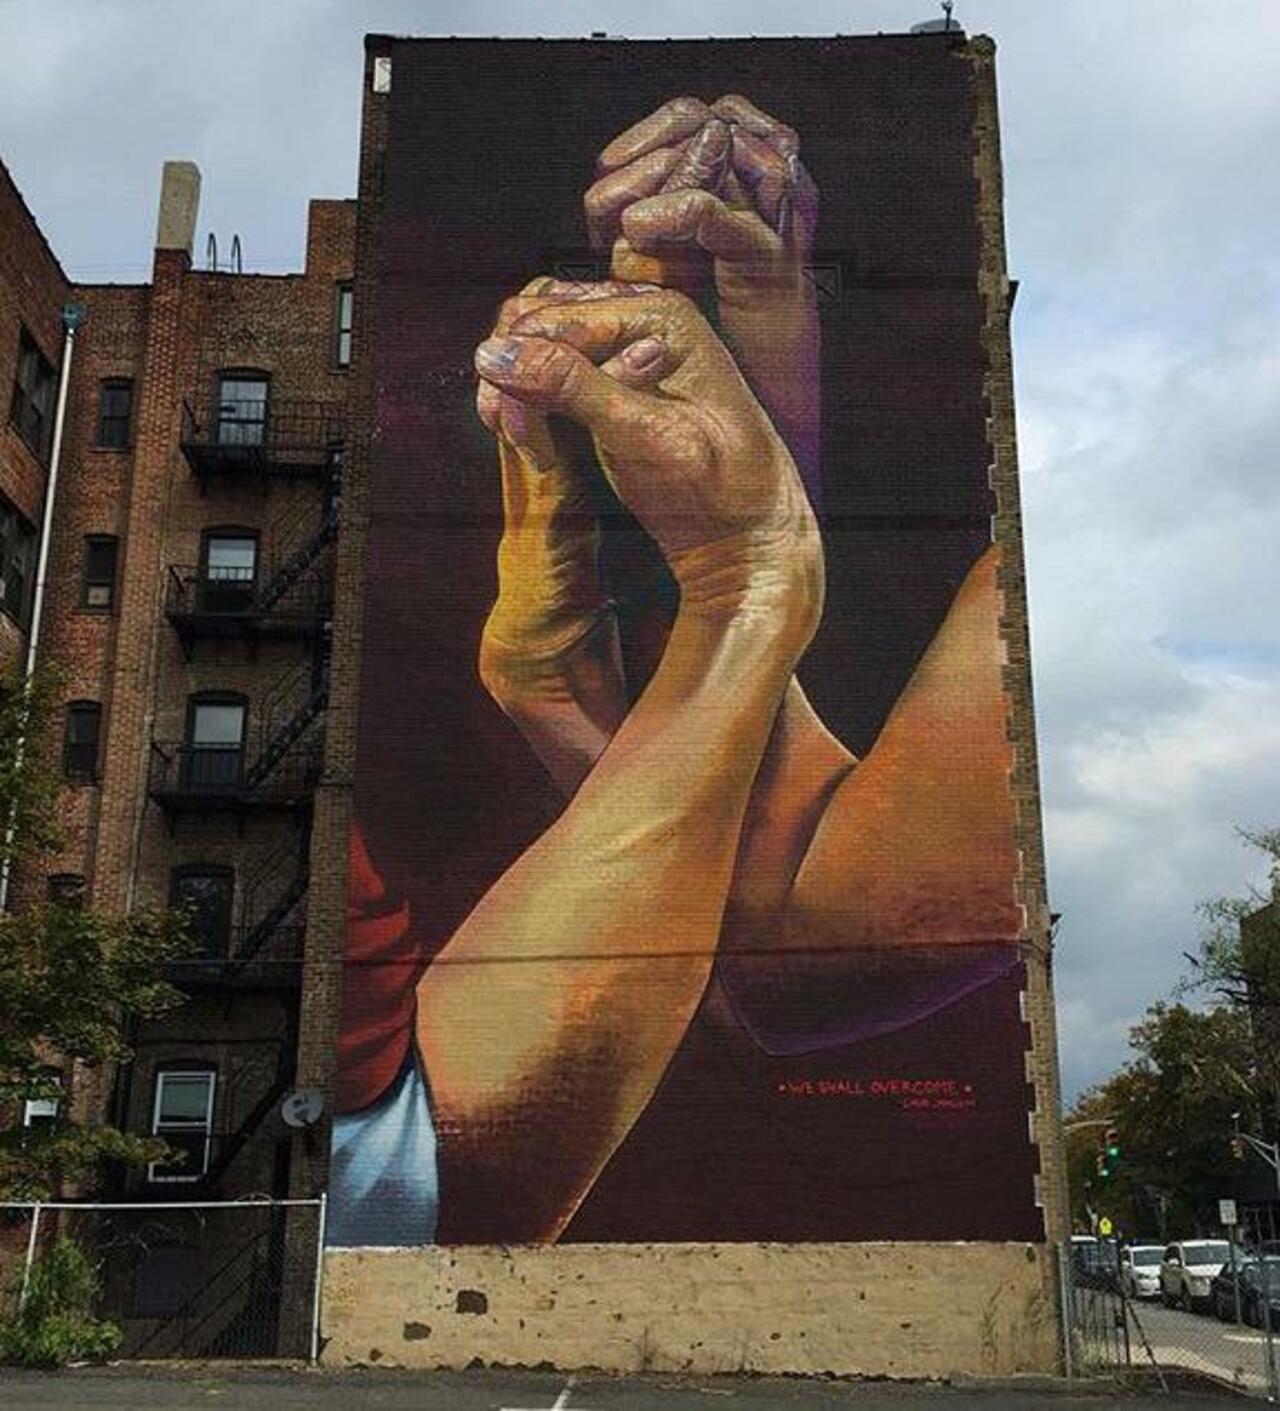 New Street Art by CaseMaclaim in Jersey City for the TheBKcollective 

#art #graffiti #mural #streetart http://t.co/6ixdmWkKQQ